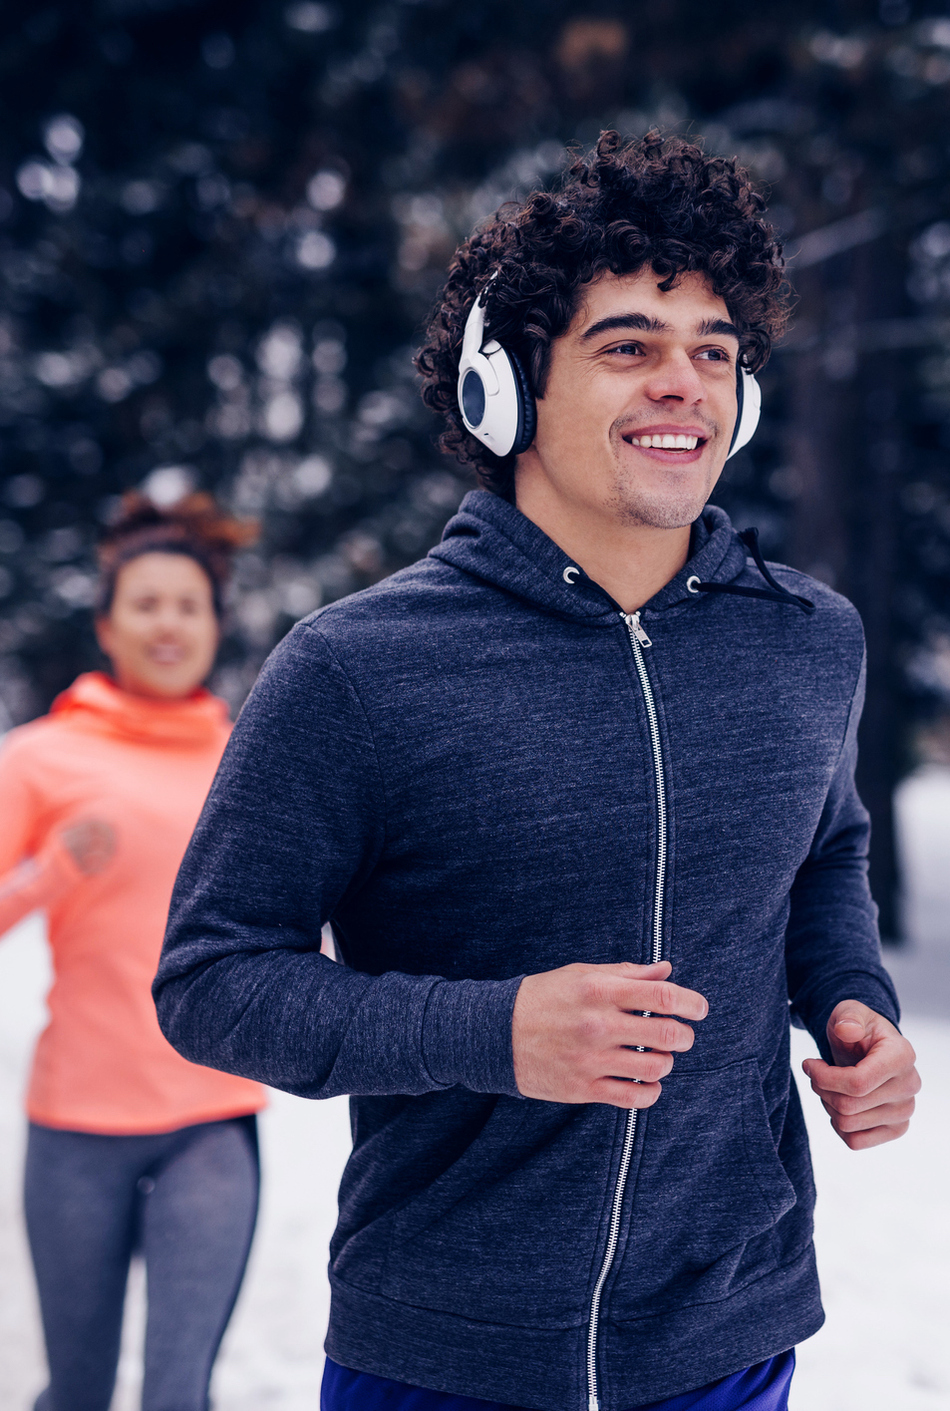 Is Exercising in Cold Weather Safe?